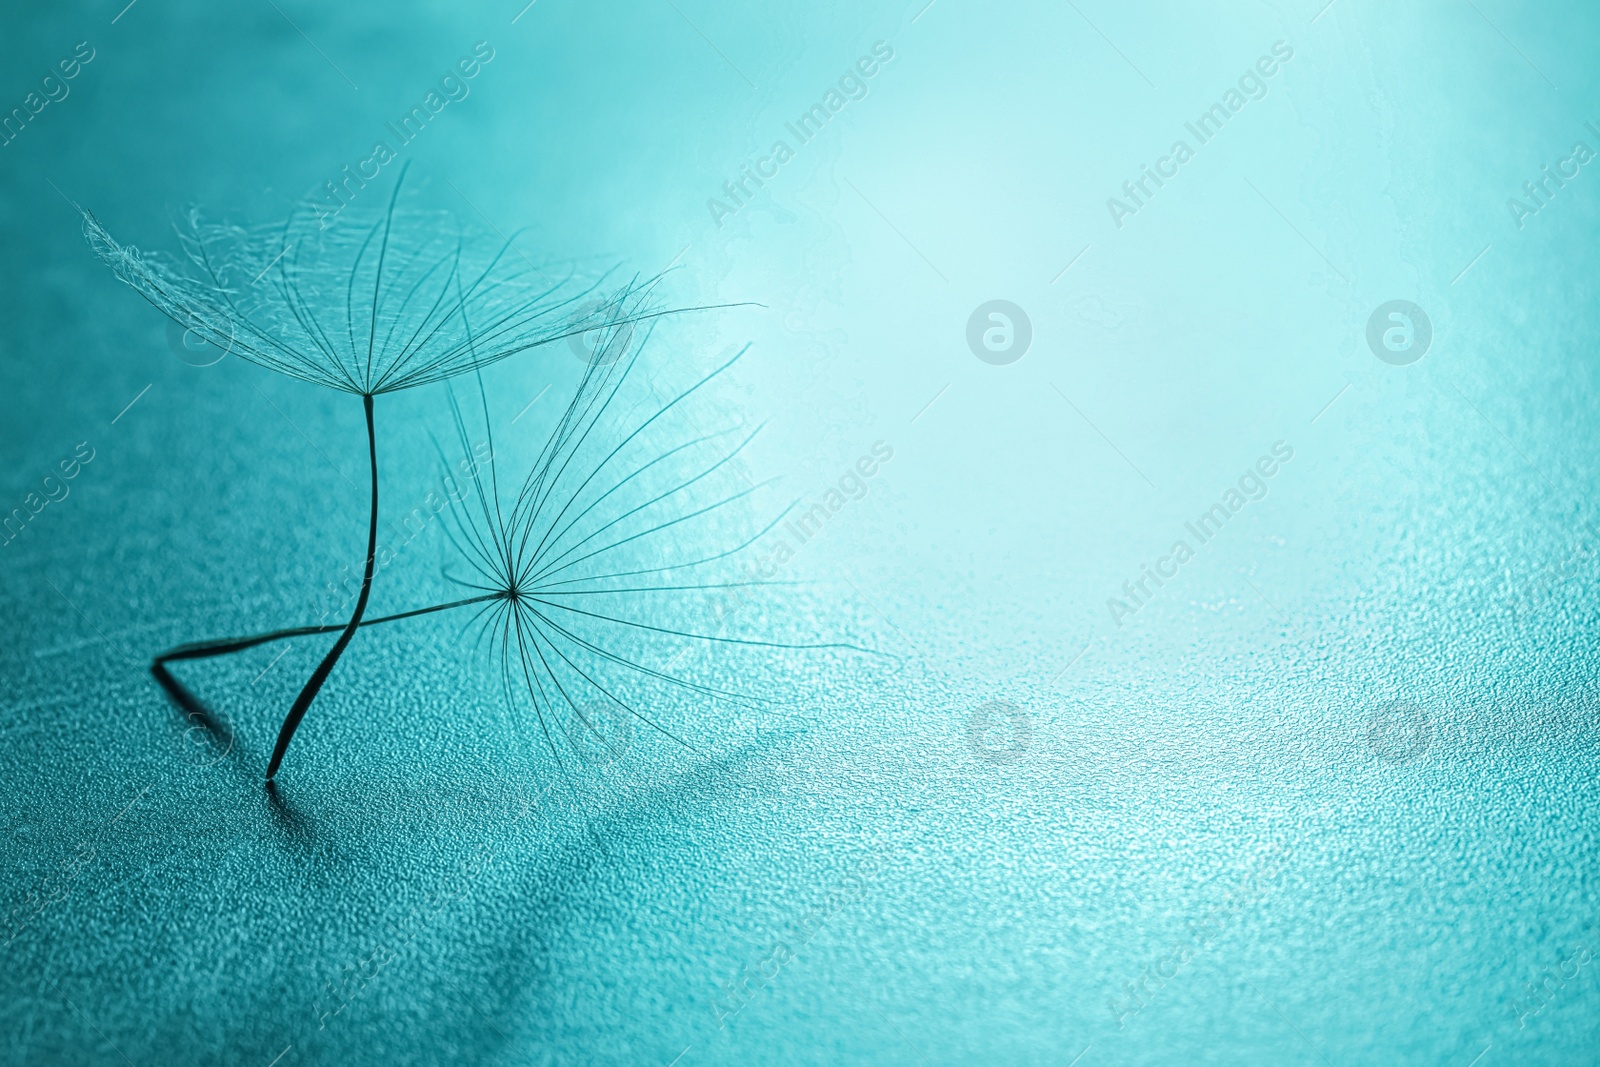 Photo of Seeds of dandelion flower on turquoise background. Space for text